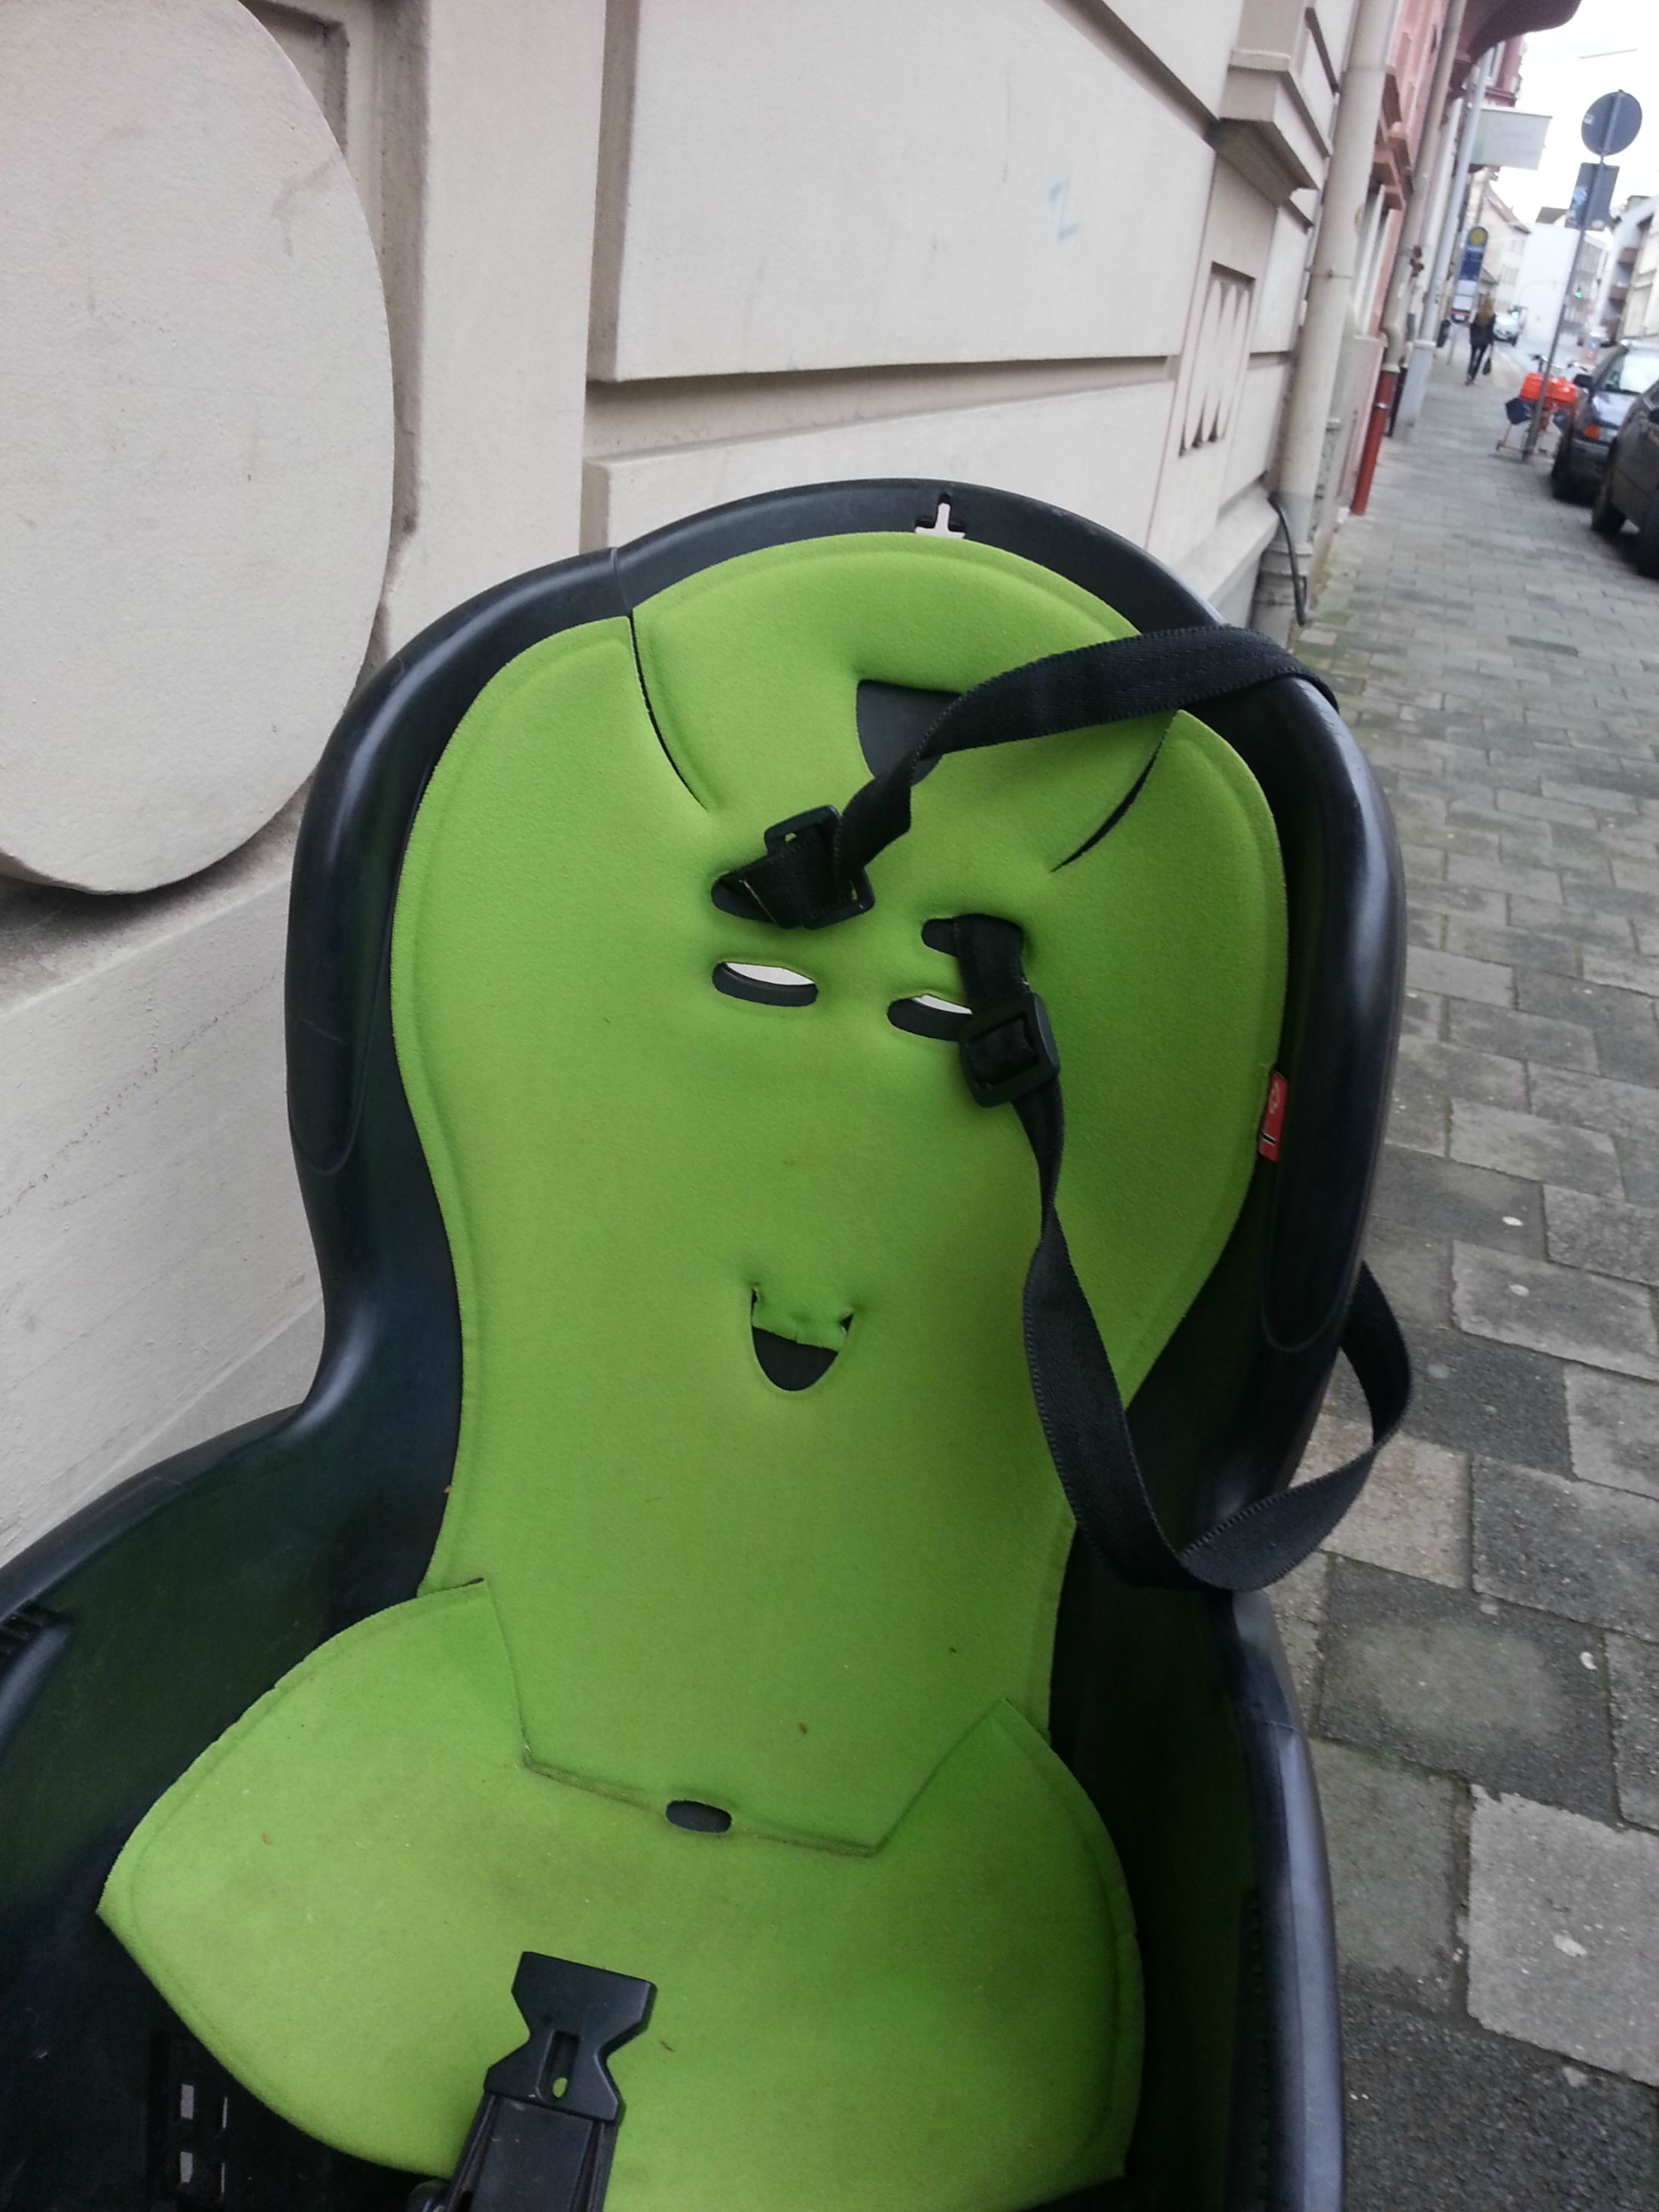 This childs bike seat looks like a stoned alien